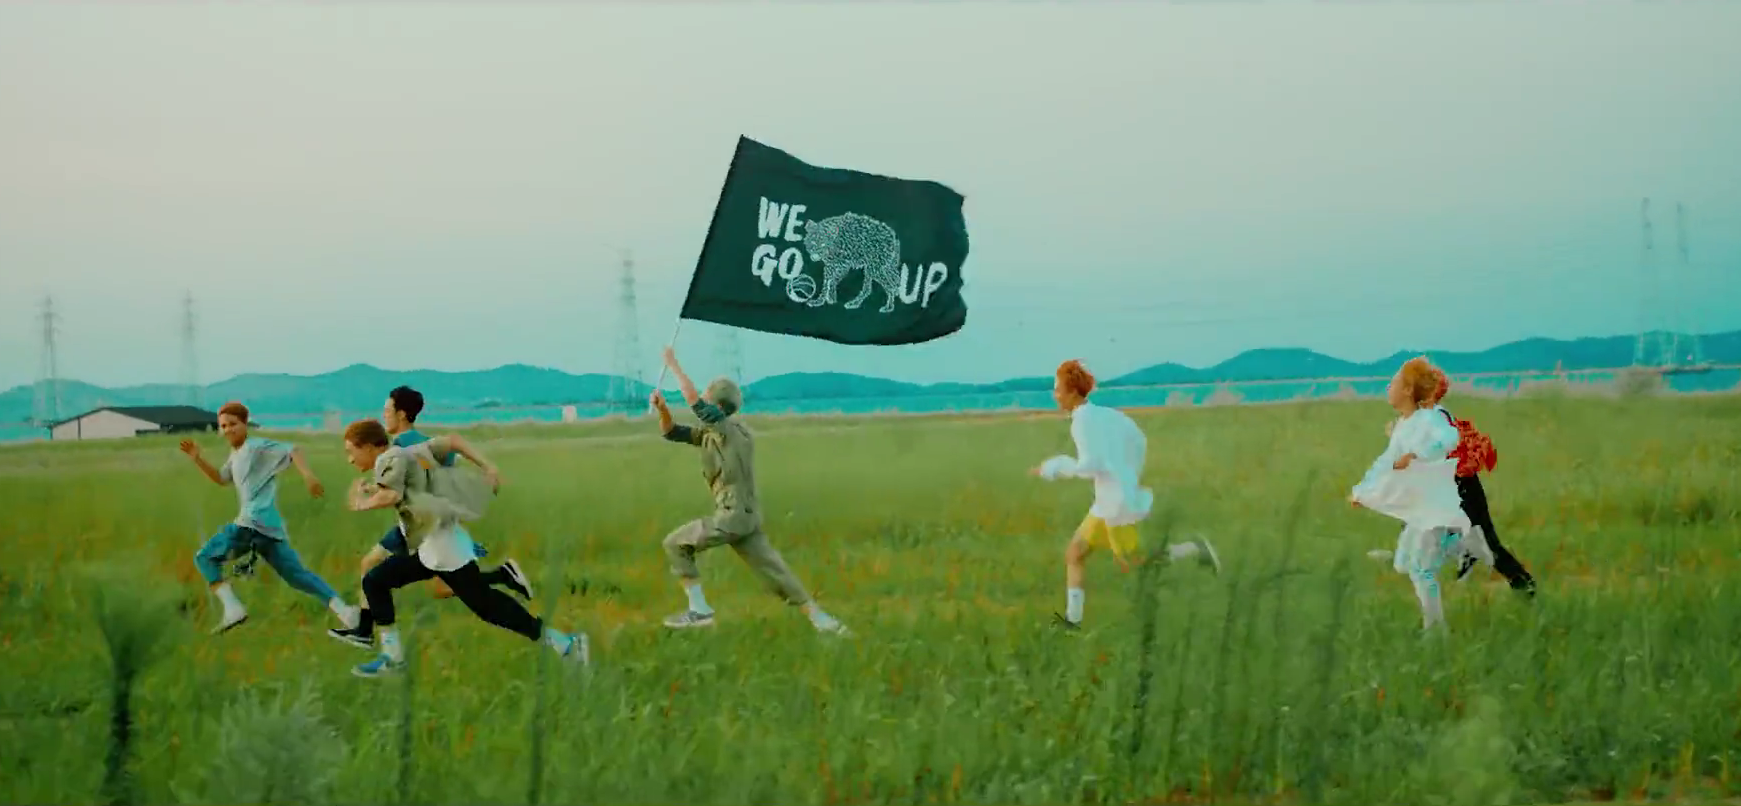 NCT Dream go. Обои NCT Dream. NCT Dream we go up. NCT Dream Wallpaper we go up.